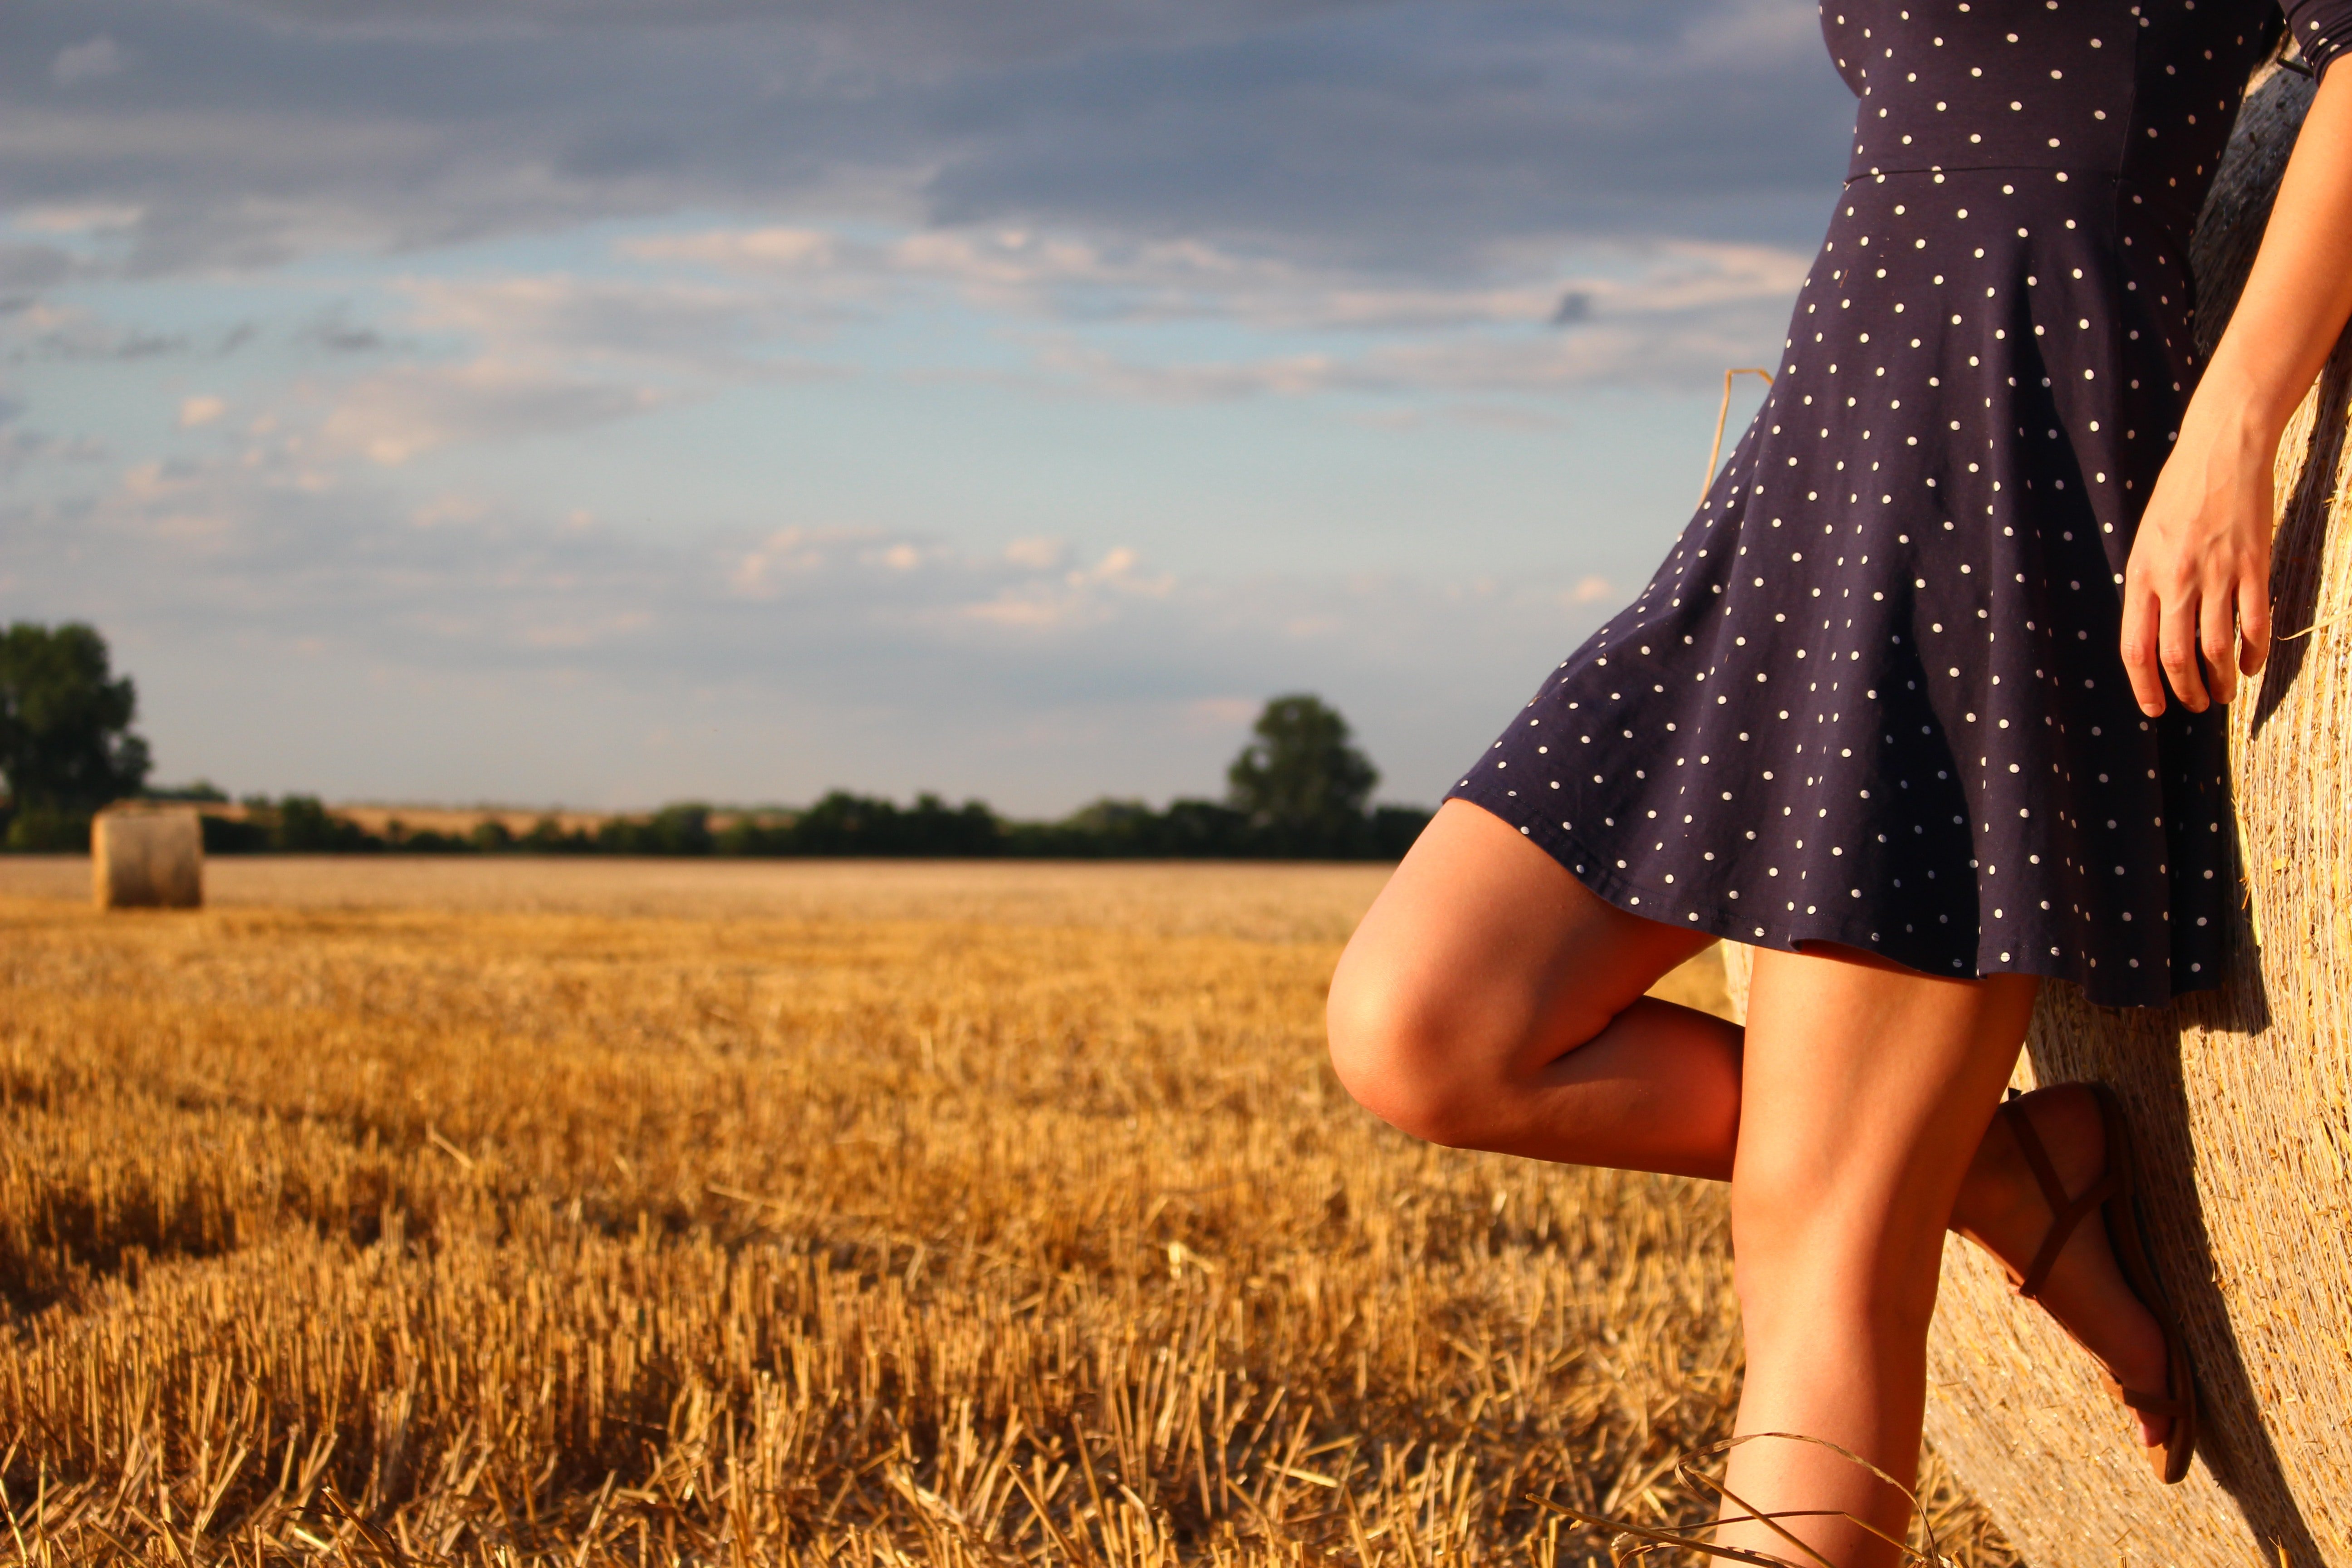 Pictured - A woman standing in a field on a sunny day wearing a blue polka dot dress | Source: Pexels 